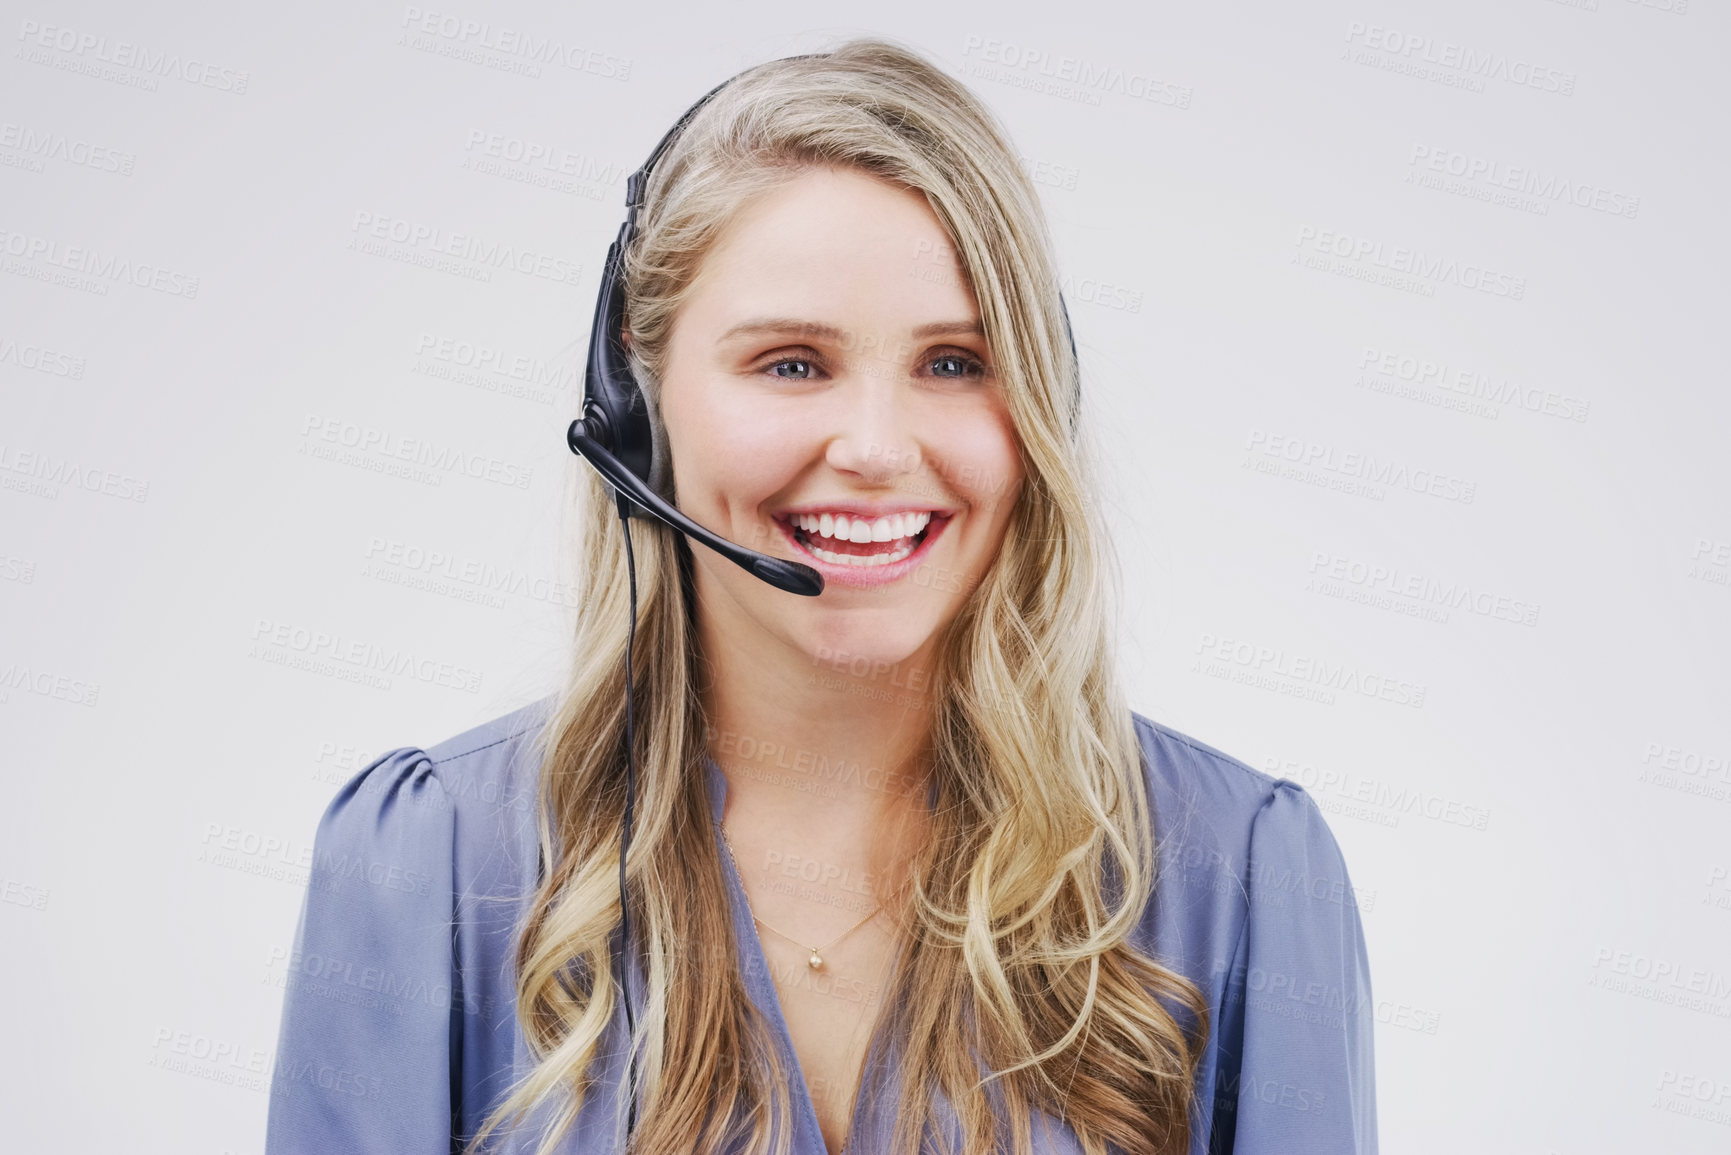 Buy stock photo Studio shot of an attractive young female customer service representative wearing a headset against a grey background